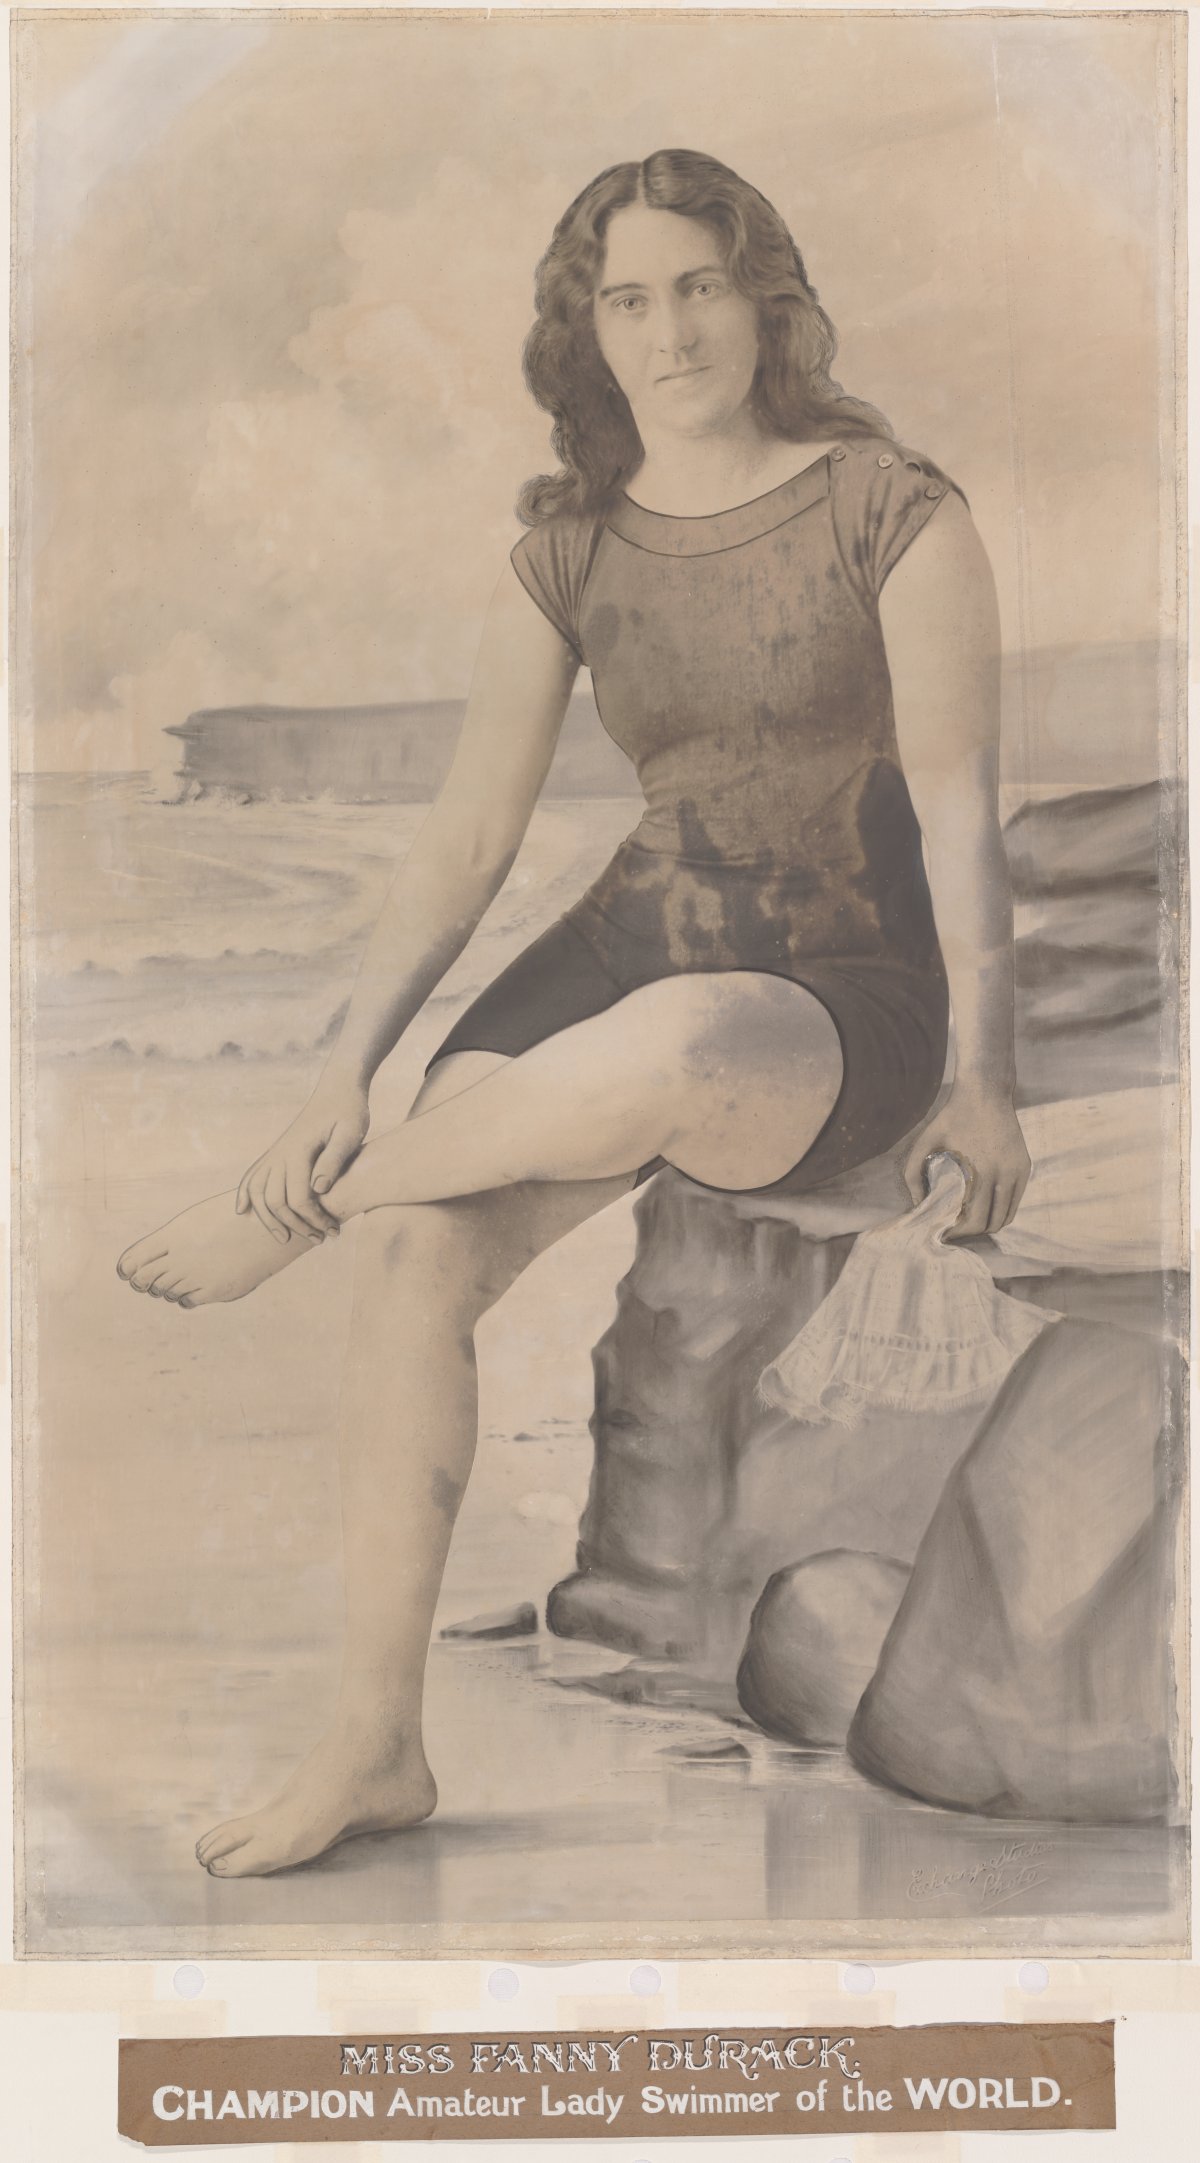 A sepia toned photograph of a woman sitting on a rock. She is wearing an old fashioned swim suit. She is sitting crossed legged. Beneath her is a caption saying ""MISS FANNY DURACK" Champion Amateur Lady Swimmer of the World"